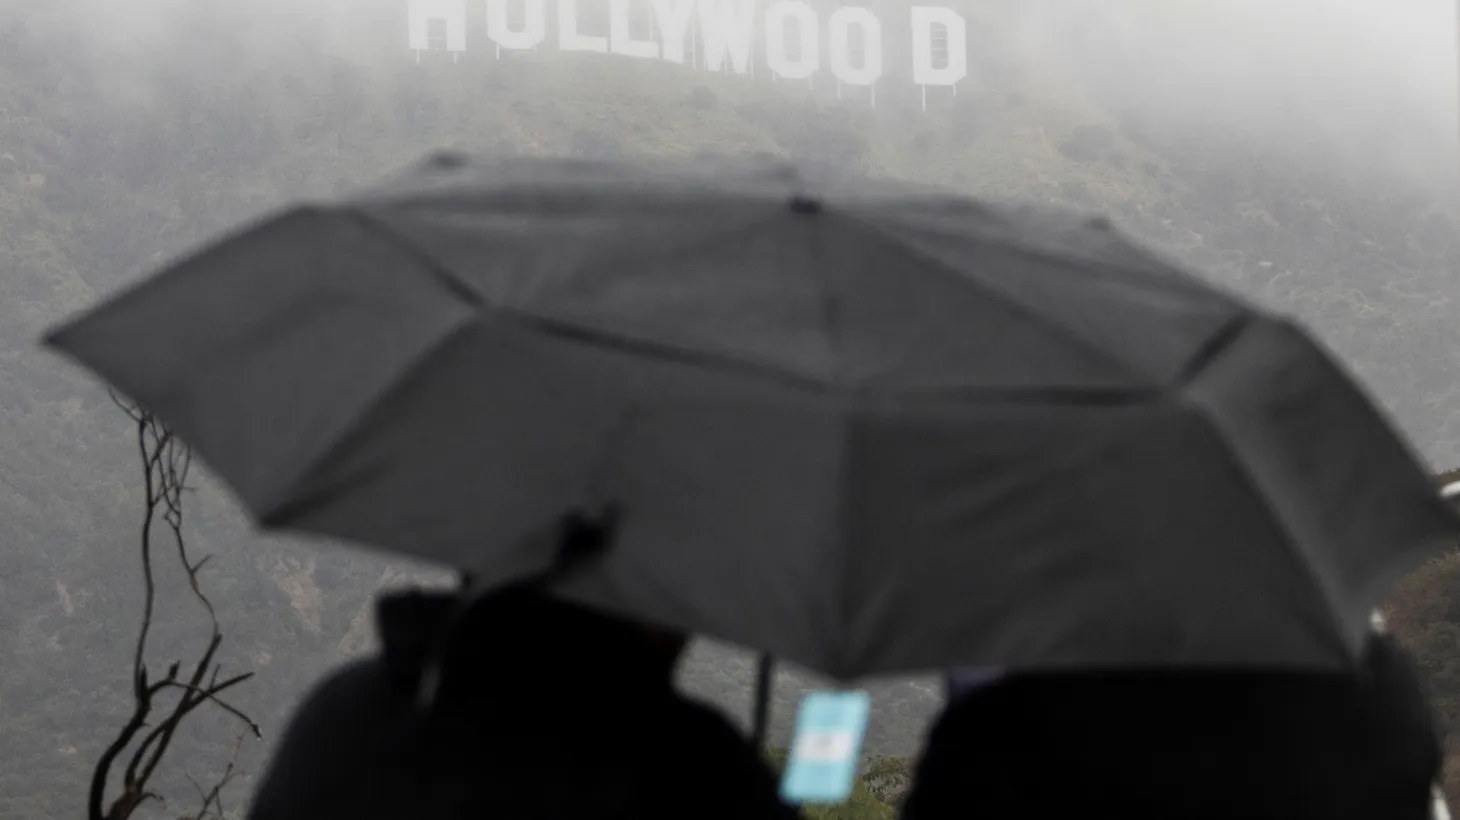 Visitors look at the Hollywood sign during a rare cold winter storm in Los Angeles, California, U.S., February 24, 2023.